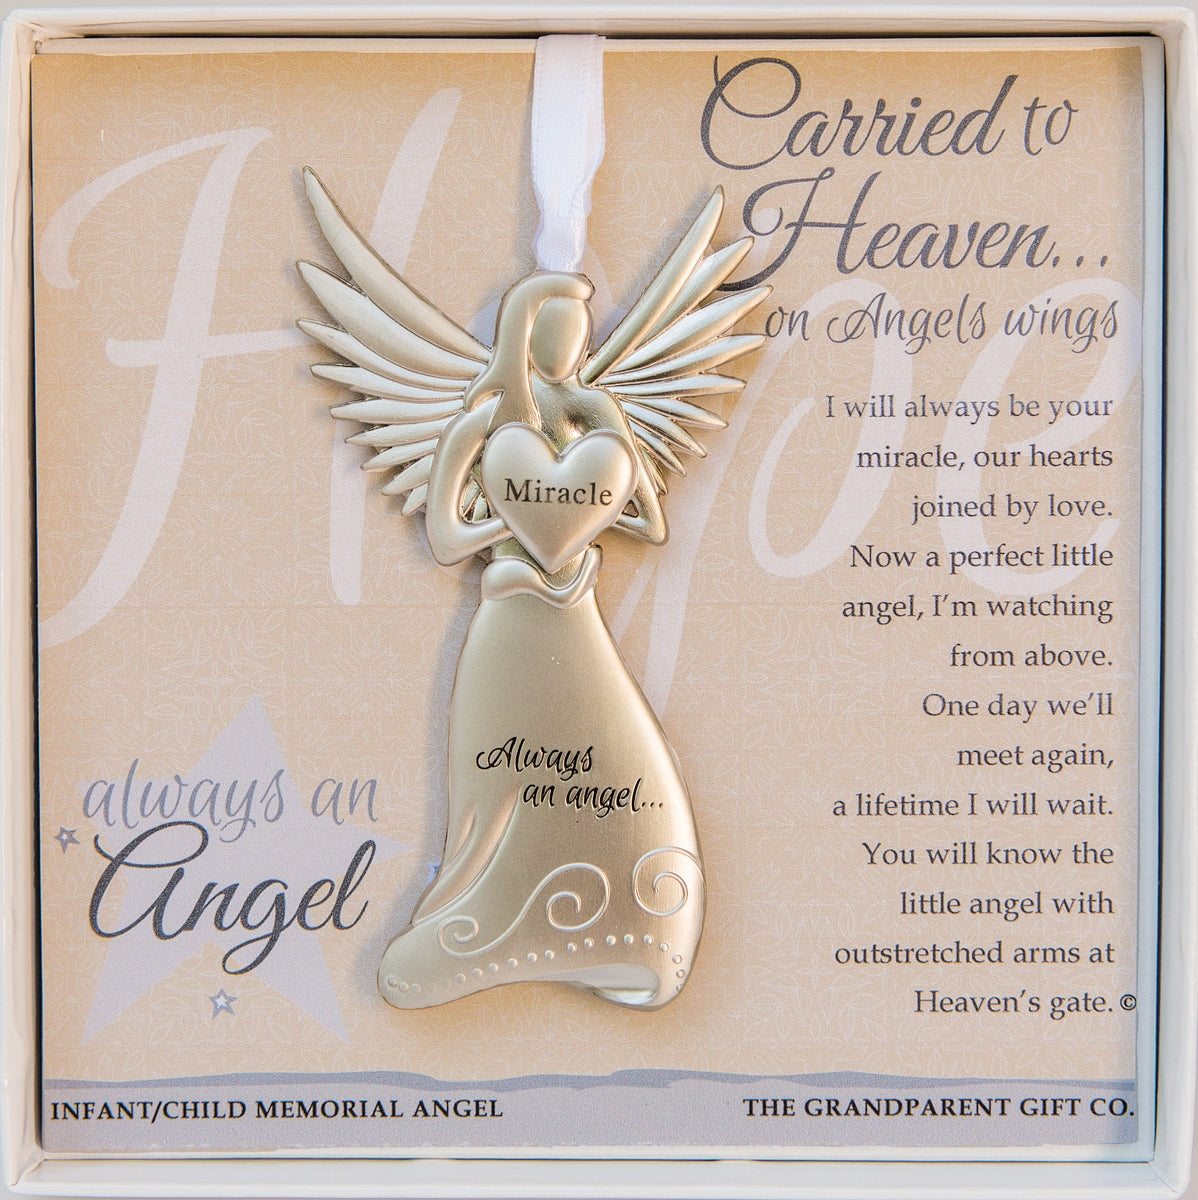 Infant Loss Gift - 4" metal miracle angel ornament with "Carried to Heaven" poem in white box with clear lid.